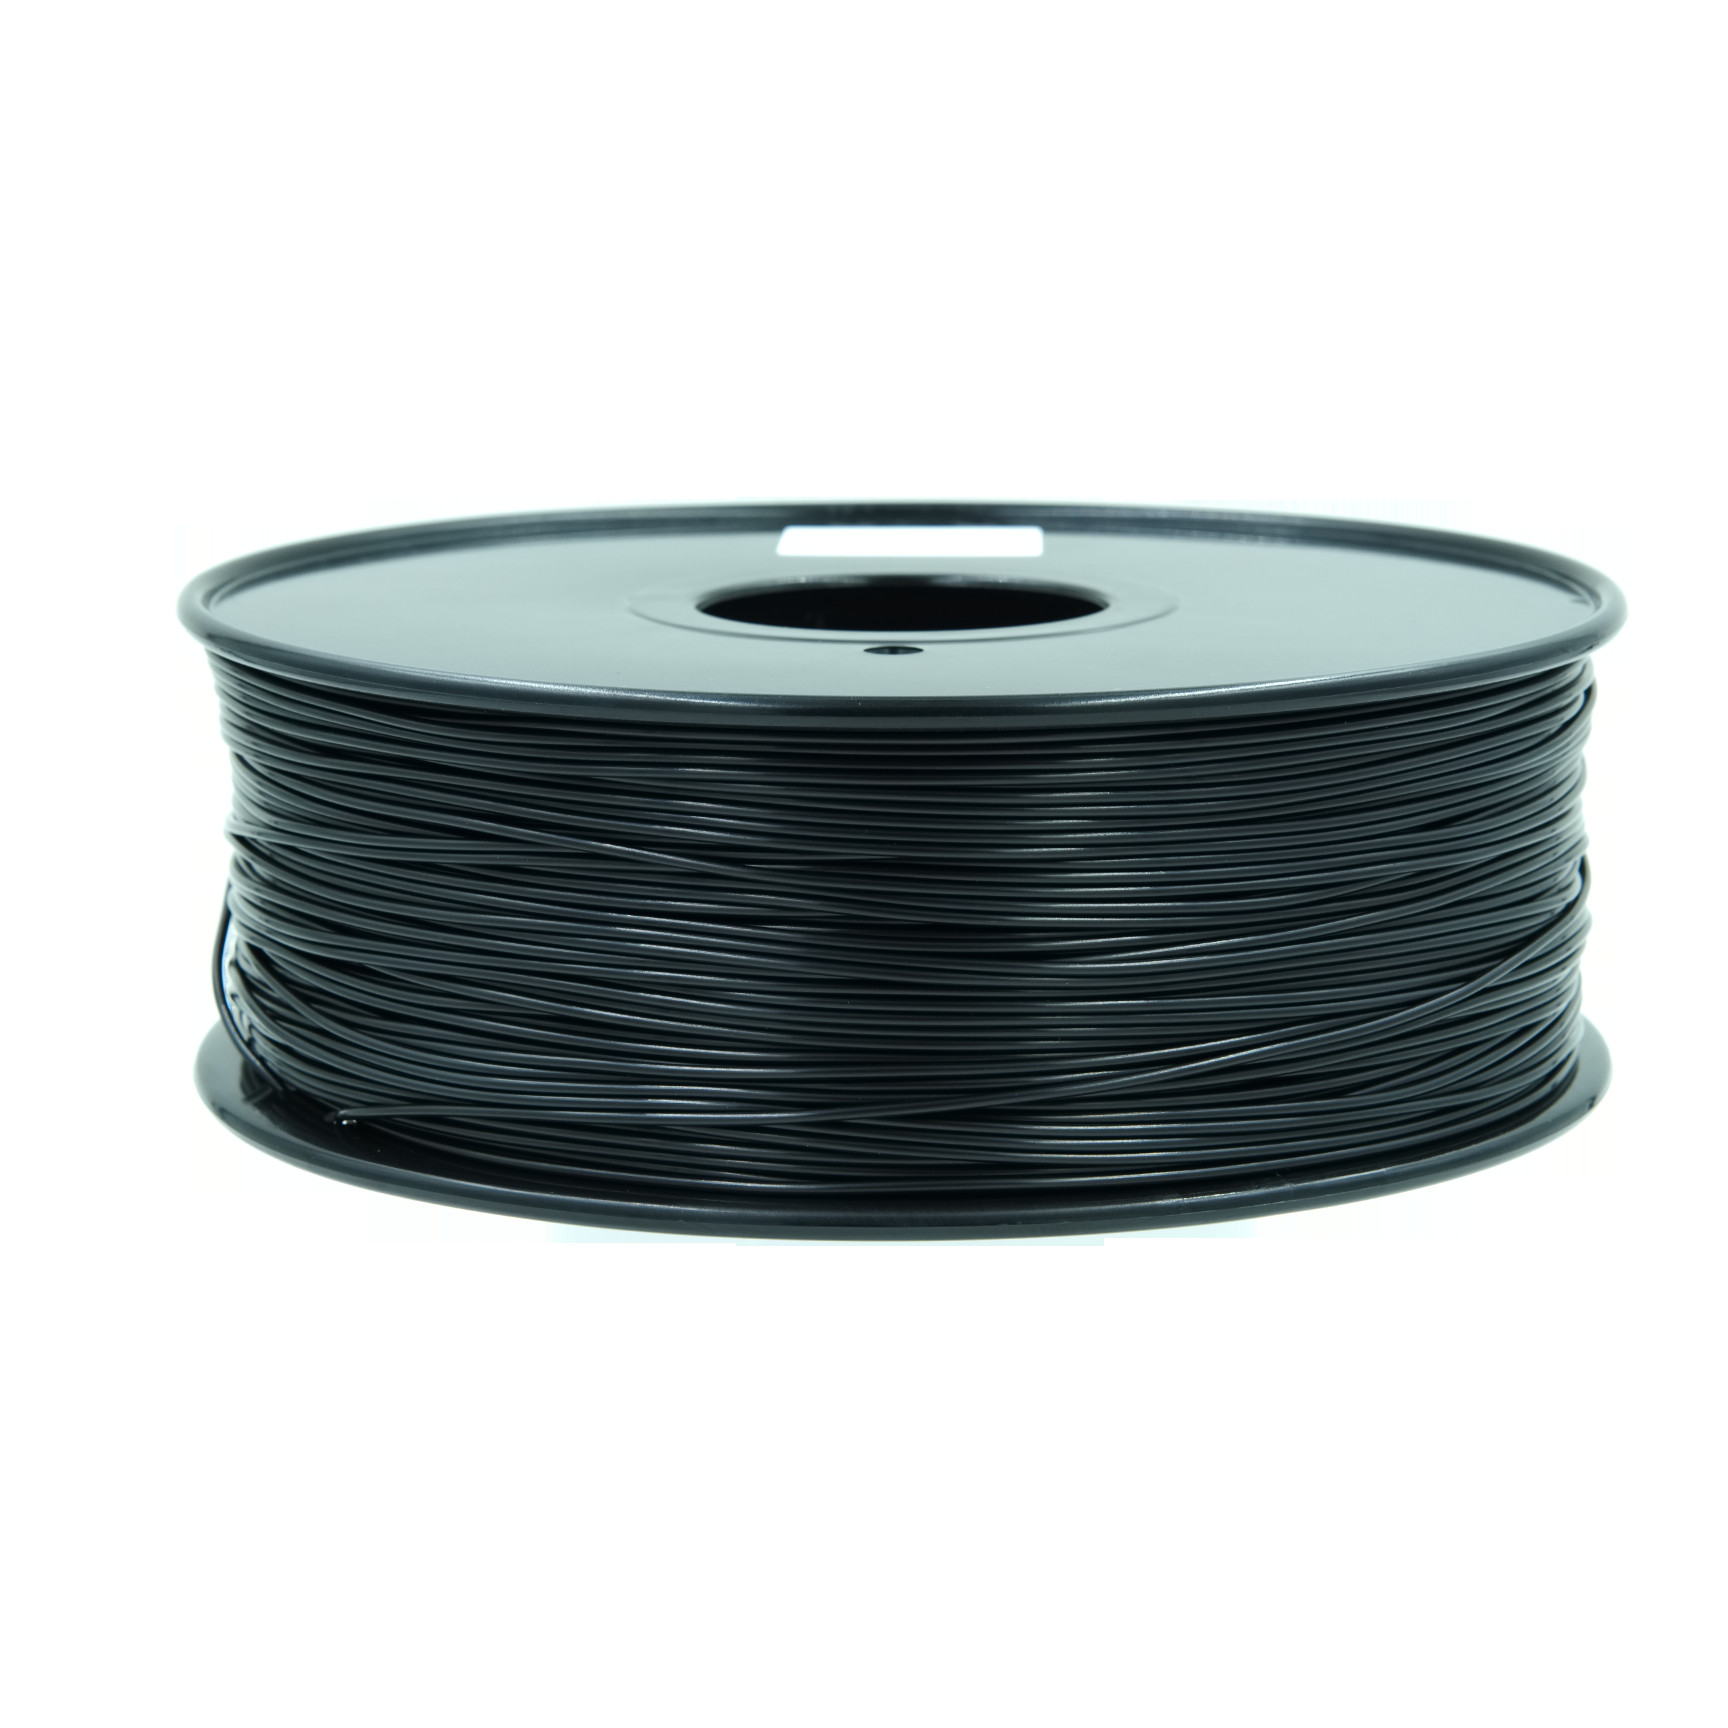 China Customized High Rigidity ABS Conductive 1.75MM/3.0MM 3D Printing Filament Black Plastic strip wholesale